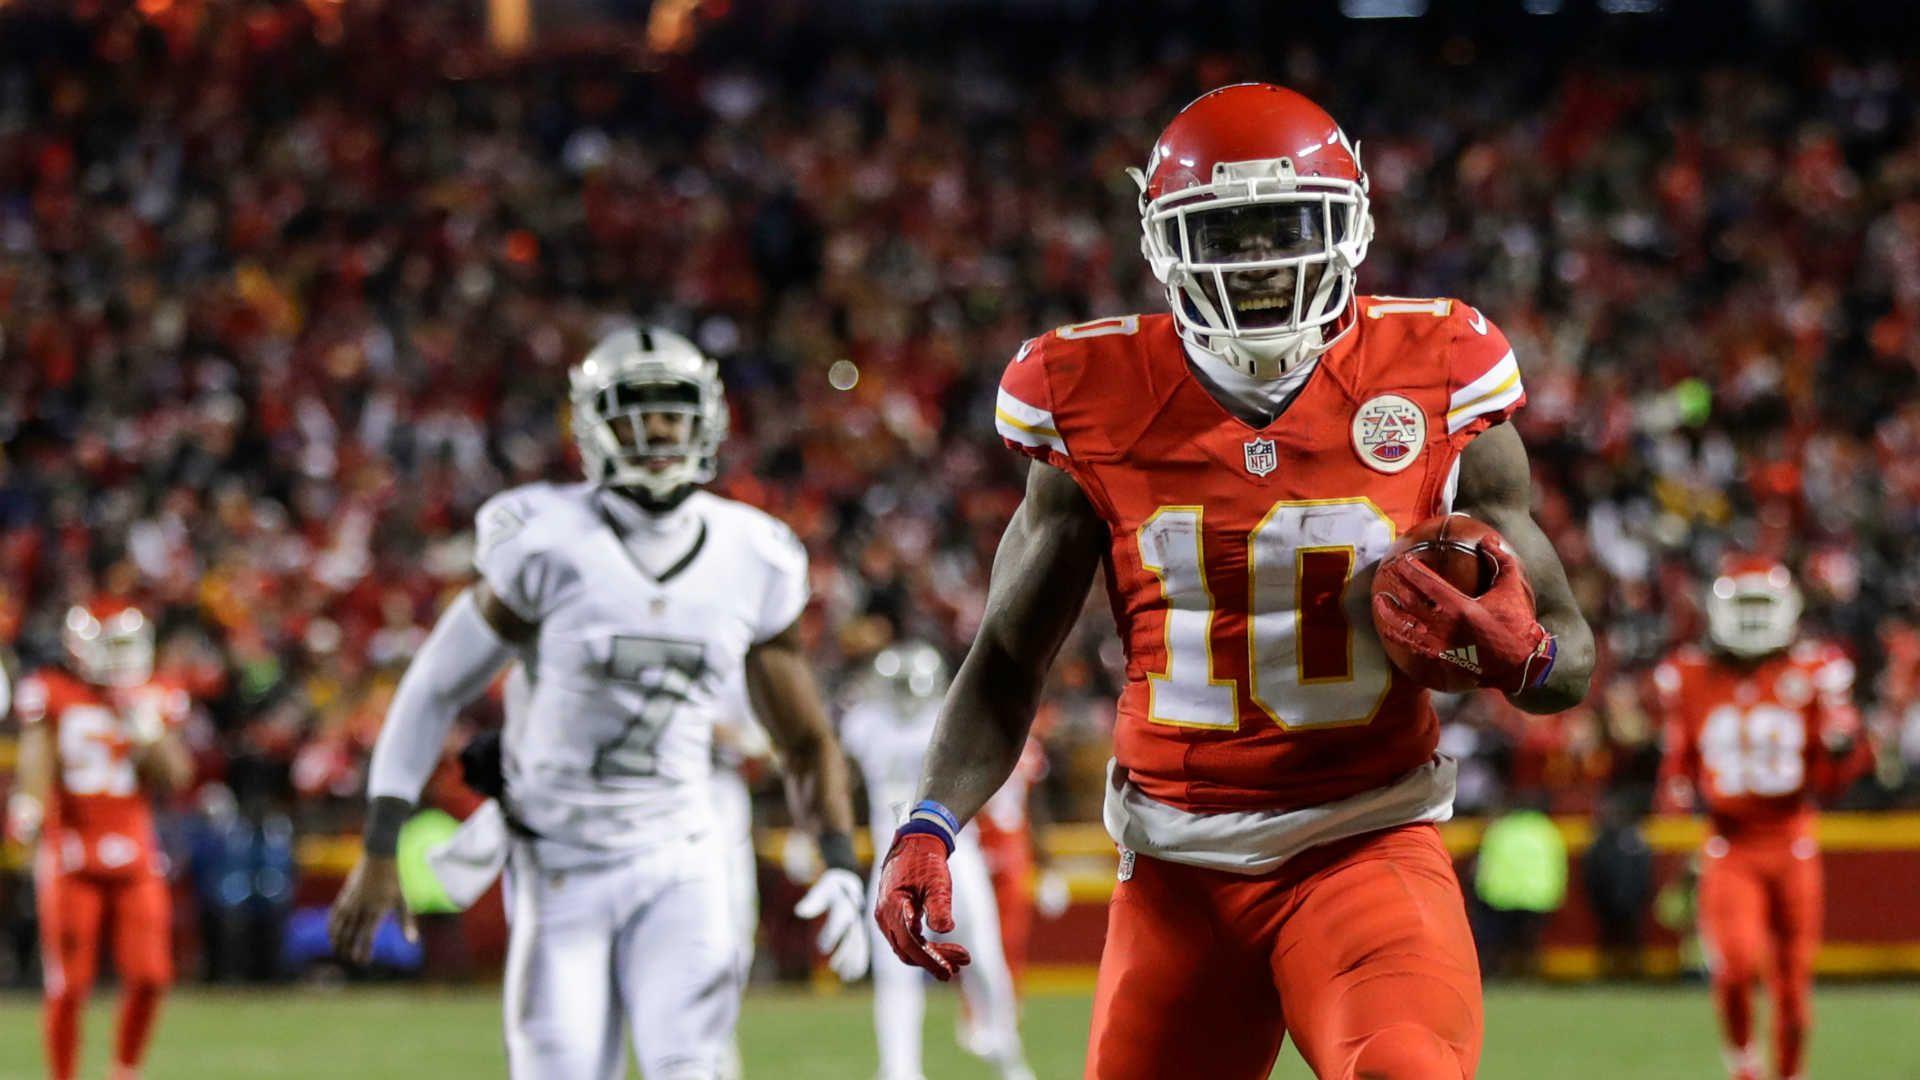 Tyreek Hill, the game